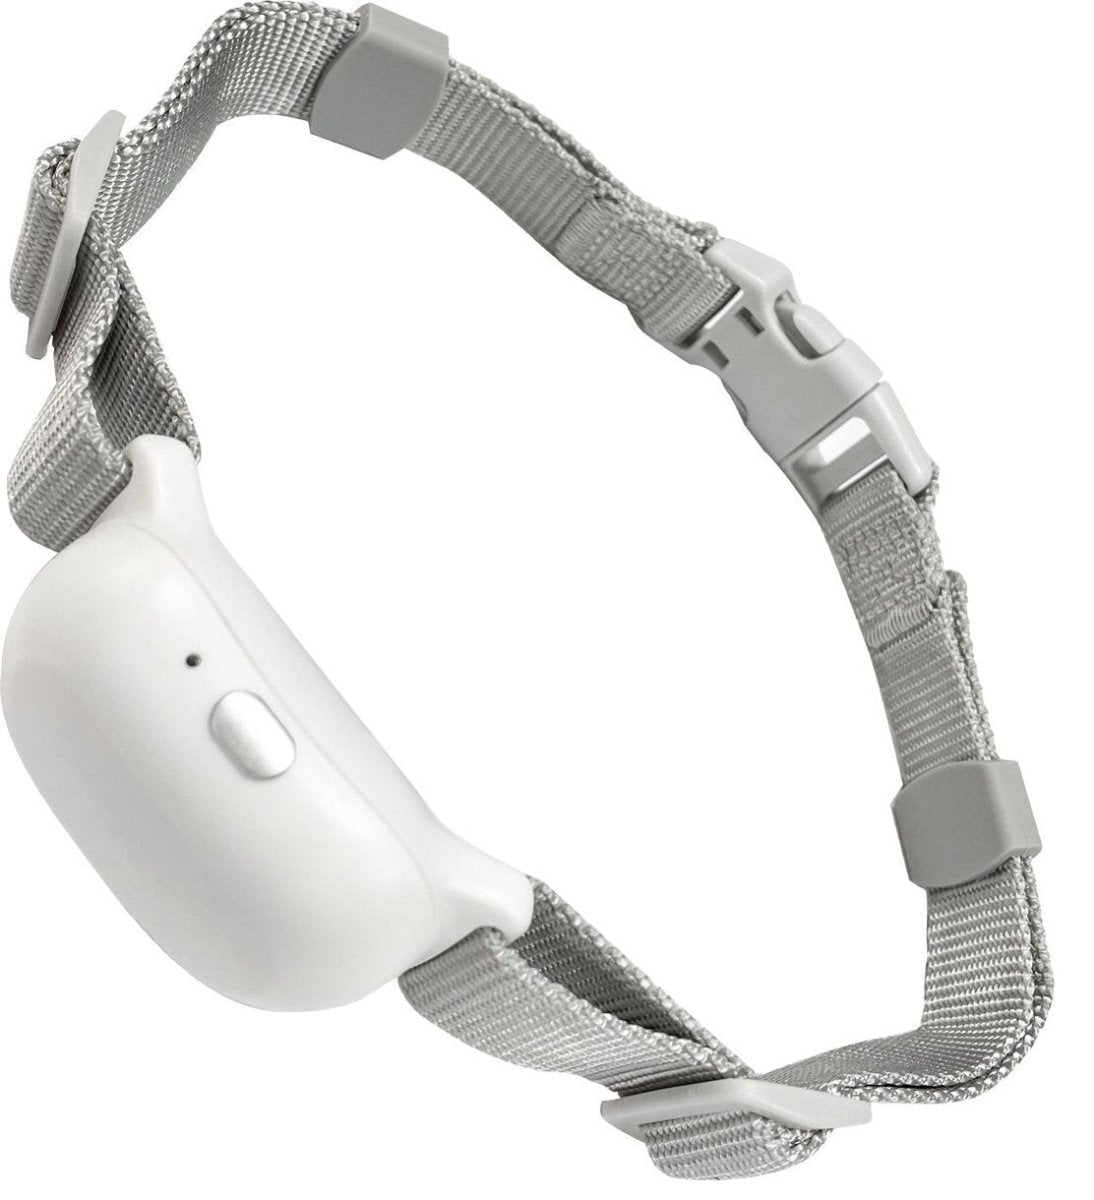 Dog Training Collar with Remote T200 White - IPX68 Waterproof, 1000ft Range - Pawious